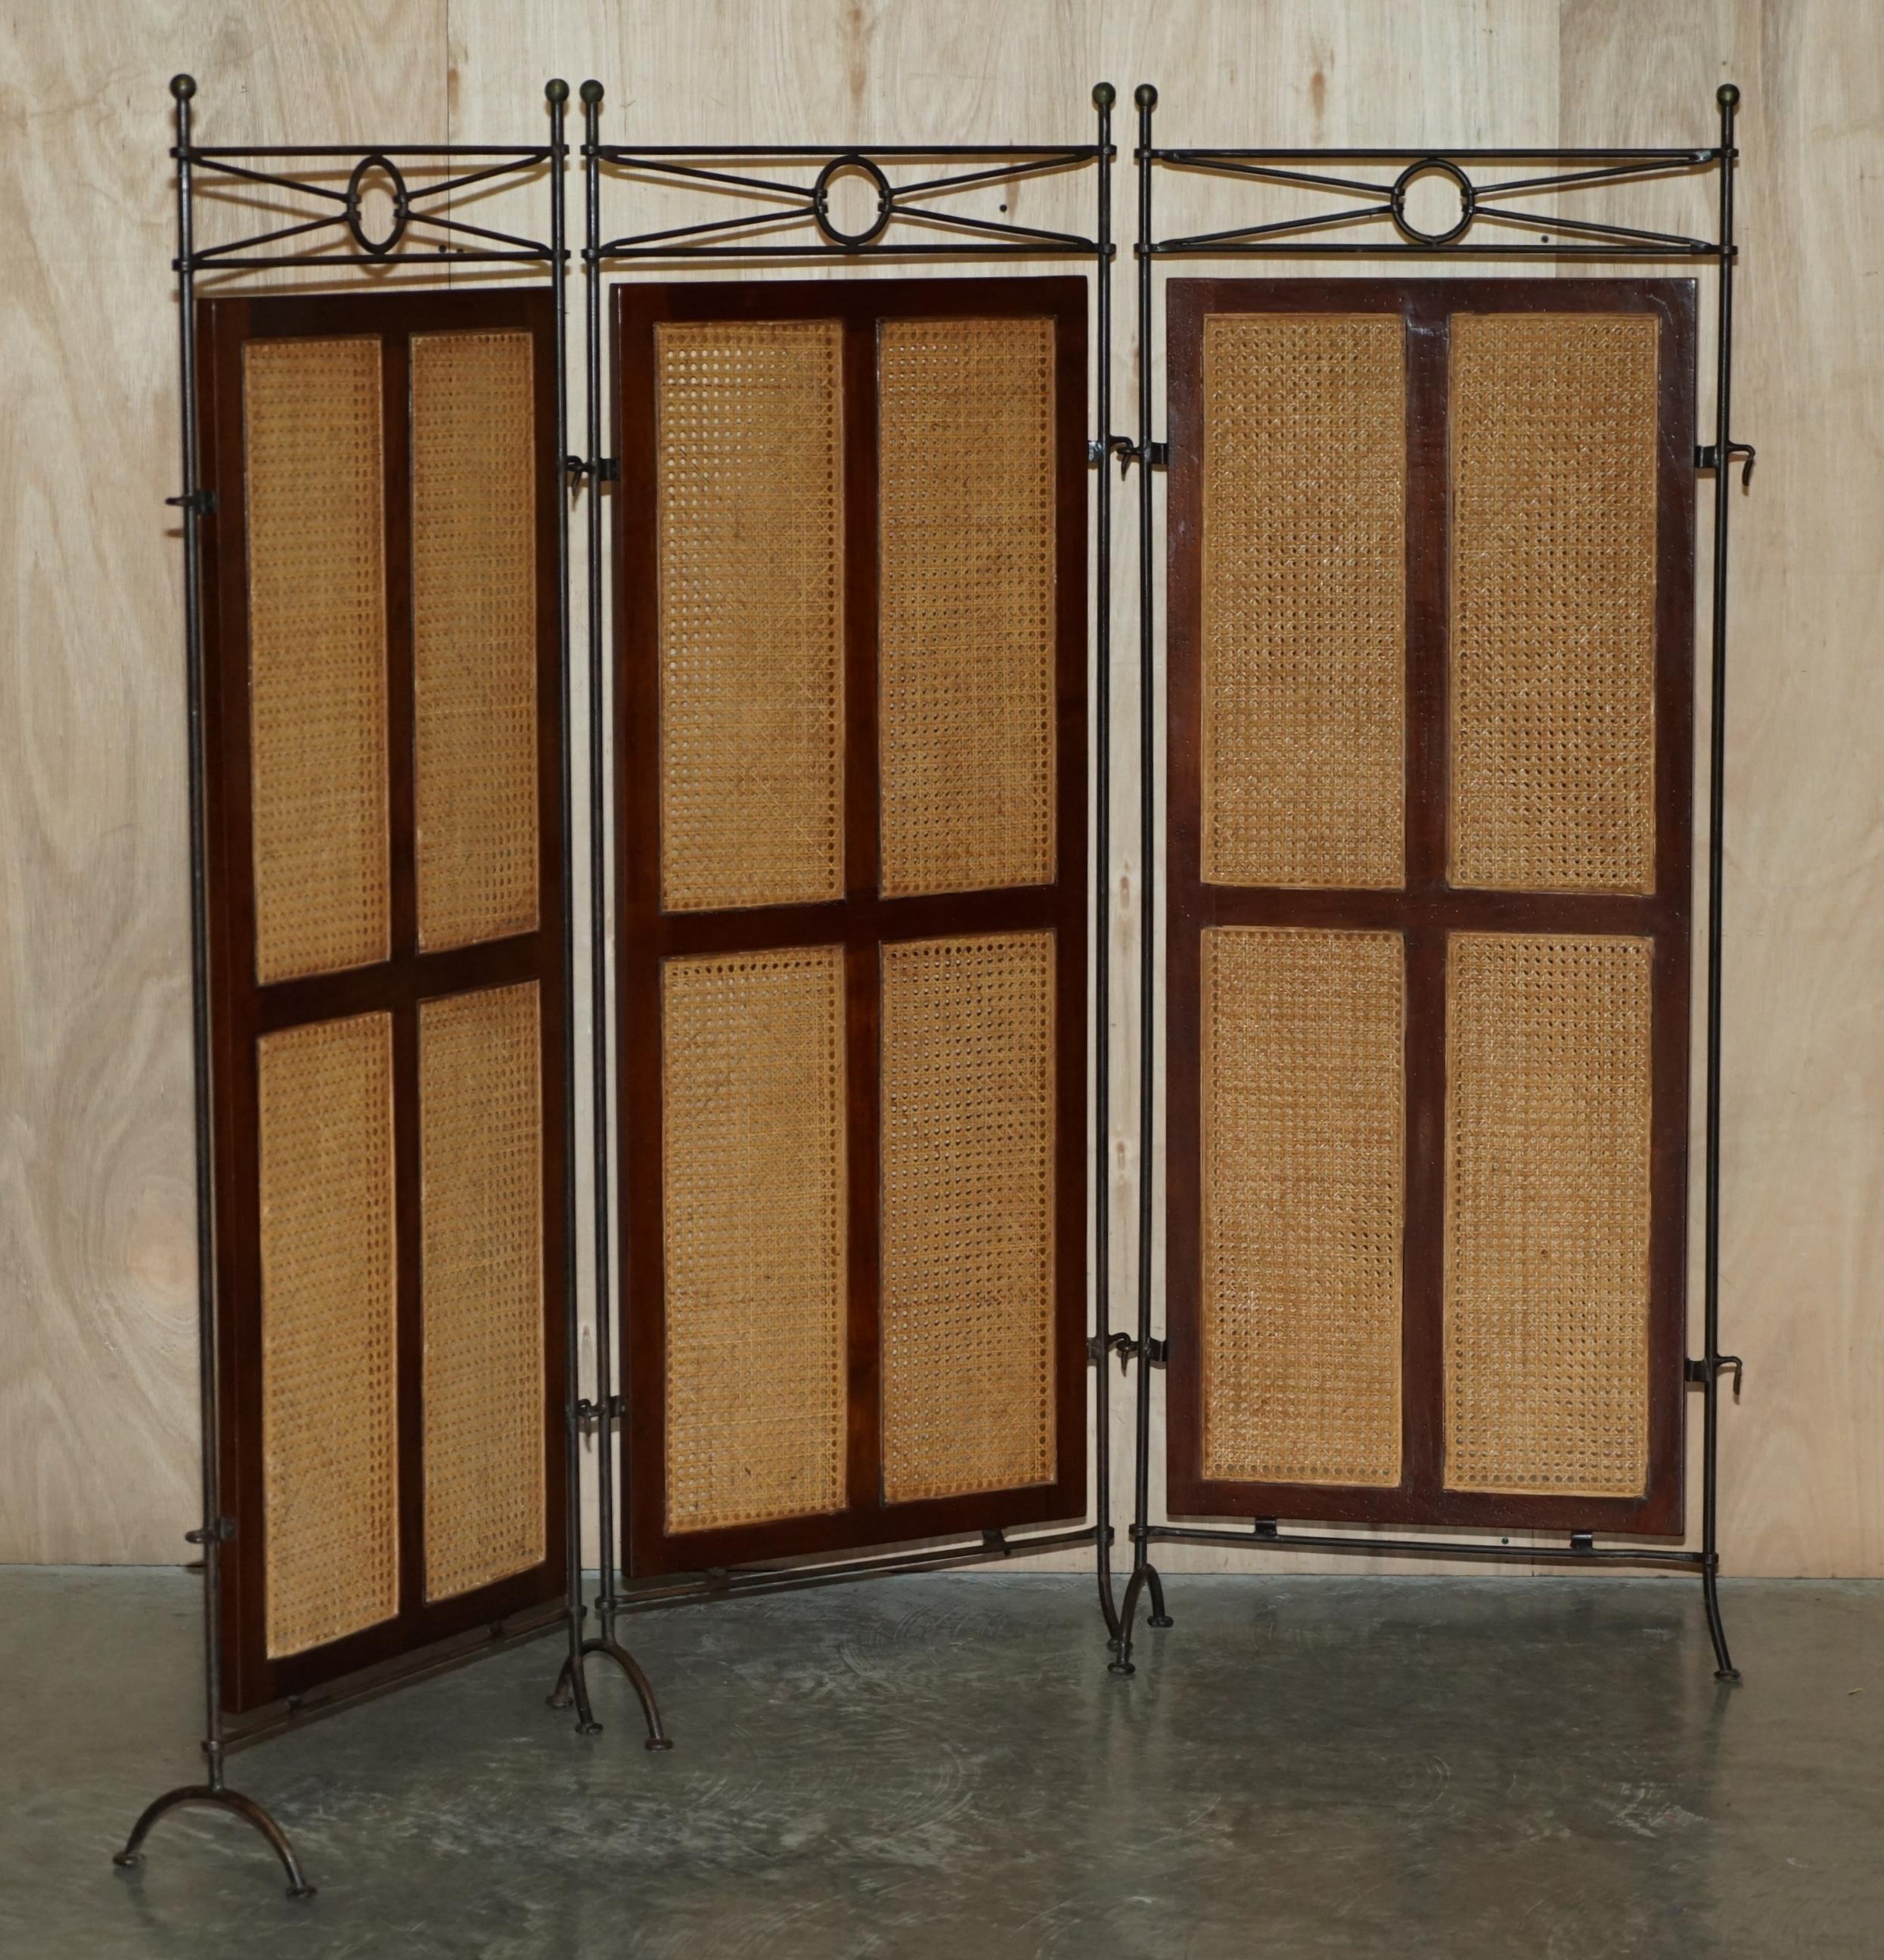 We are delighted to offer for sale this lovely triple panel, wrought iron, bergere and mahogany framed free standing room divider.

A very good looking well made and decorative room divider, the three panels can be used alone or they link in to